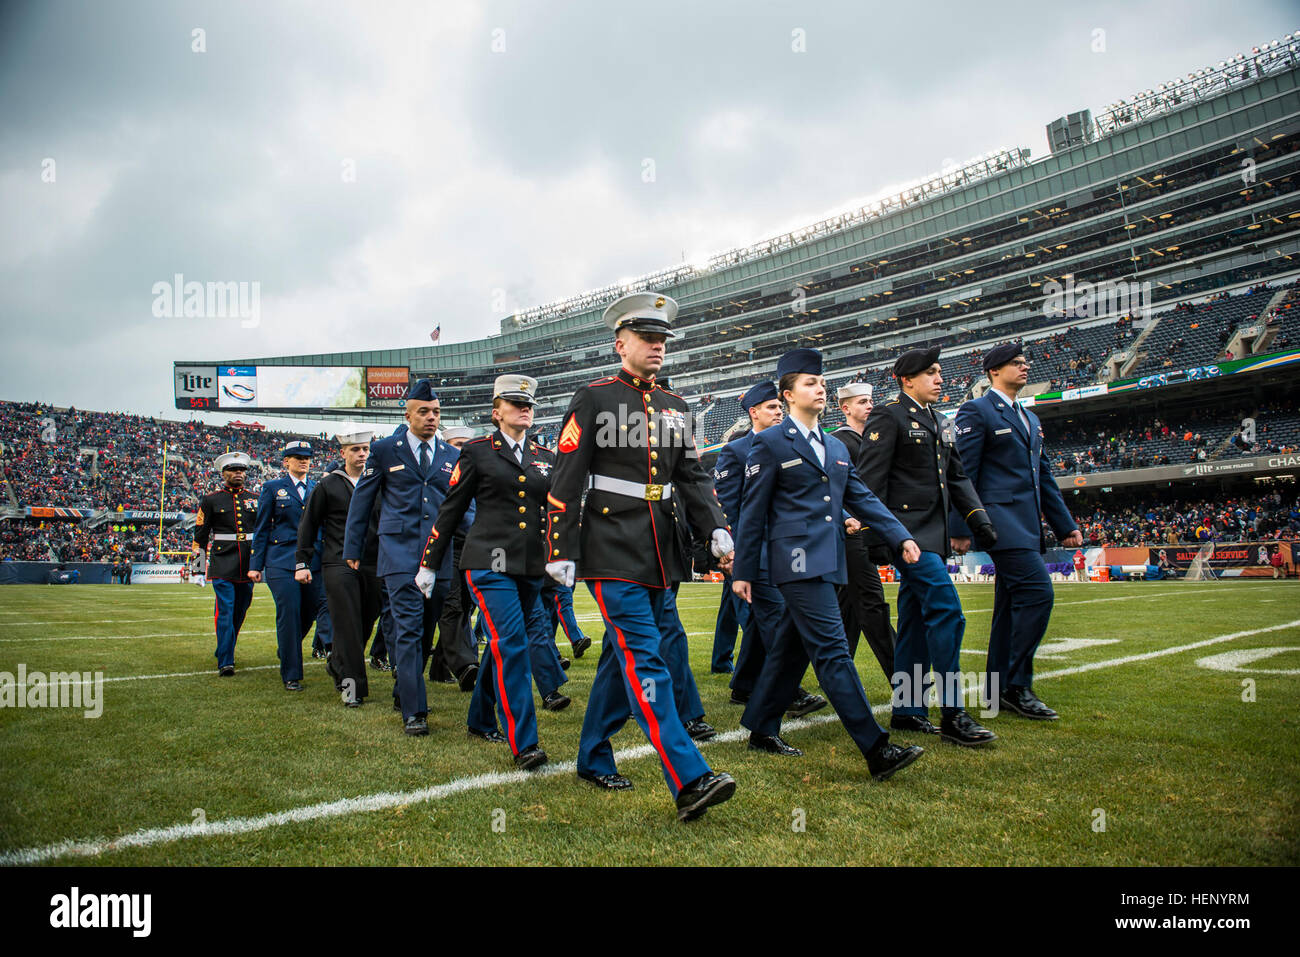 A group of service members march off the field after a reenlistment ceremony at Soldier Field during an NFL game designated to honor troops, Nov. 16., a few days after Veterans Day. (U.S. Army photo by Sgt. 1st Class Michel Sauret) Military service members honored during Chicago Bears game 141116-A-TI382-912 Stock Photo